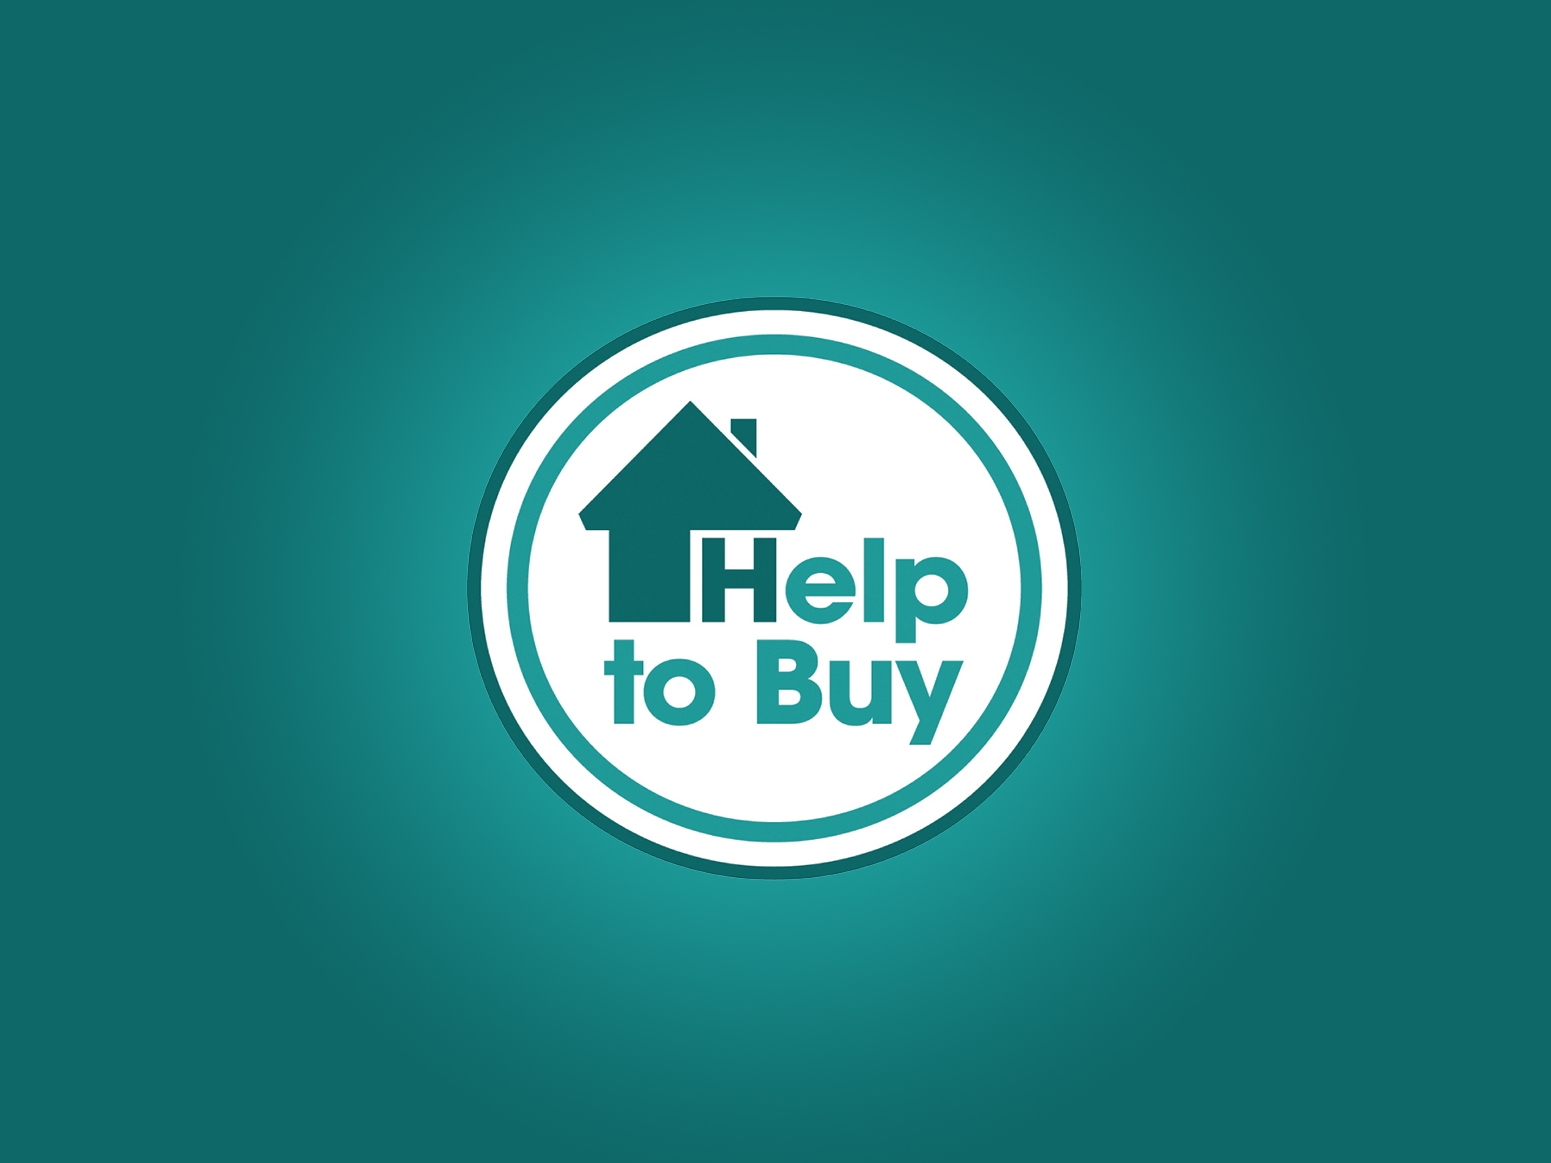 Help to Buy scheme: Find out the latest rules